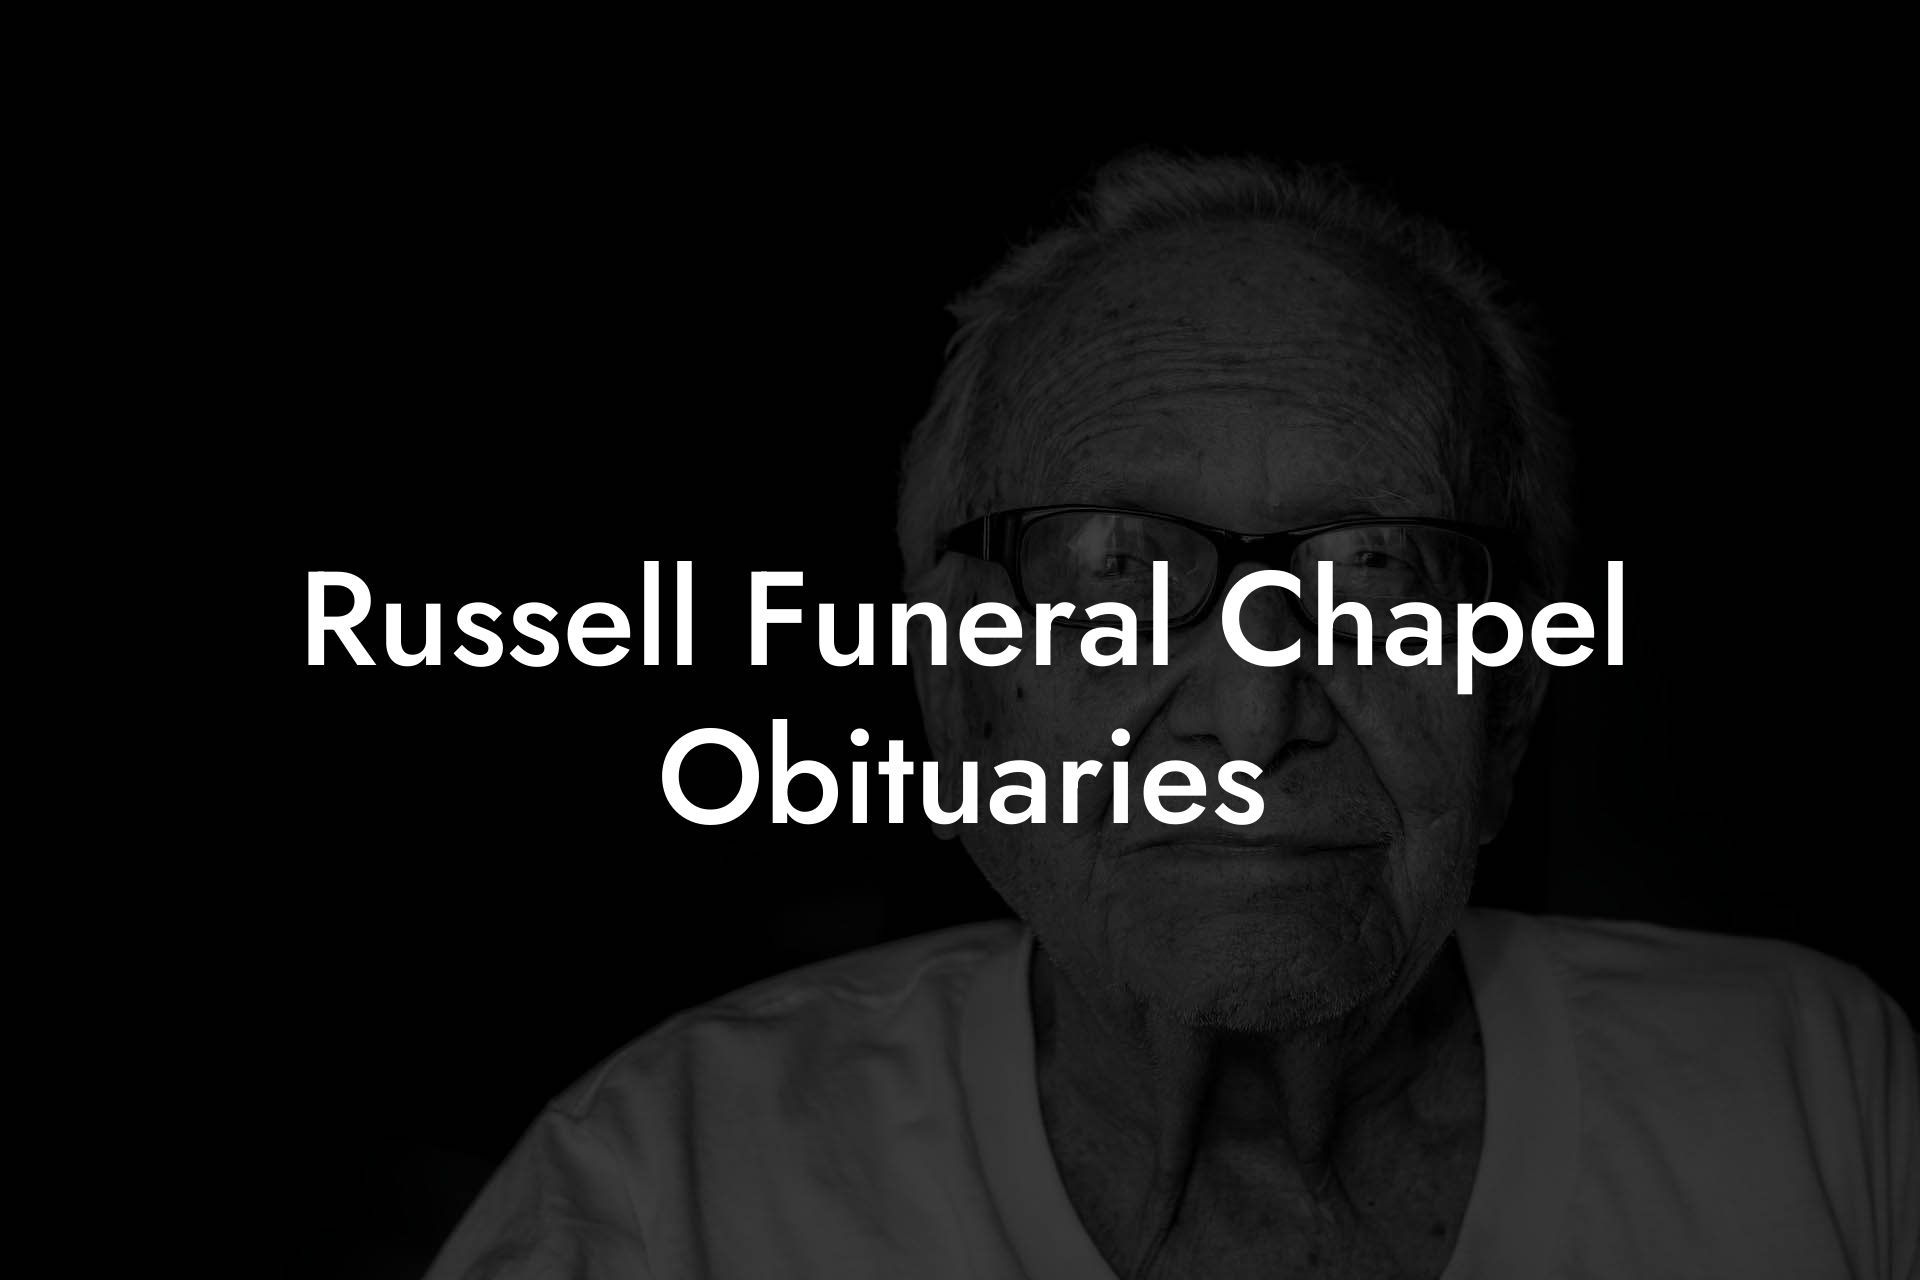 Russell Funeral Chapel Obituaries